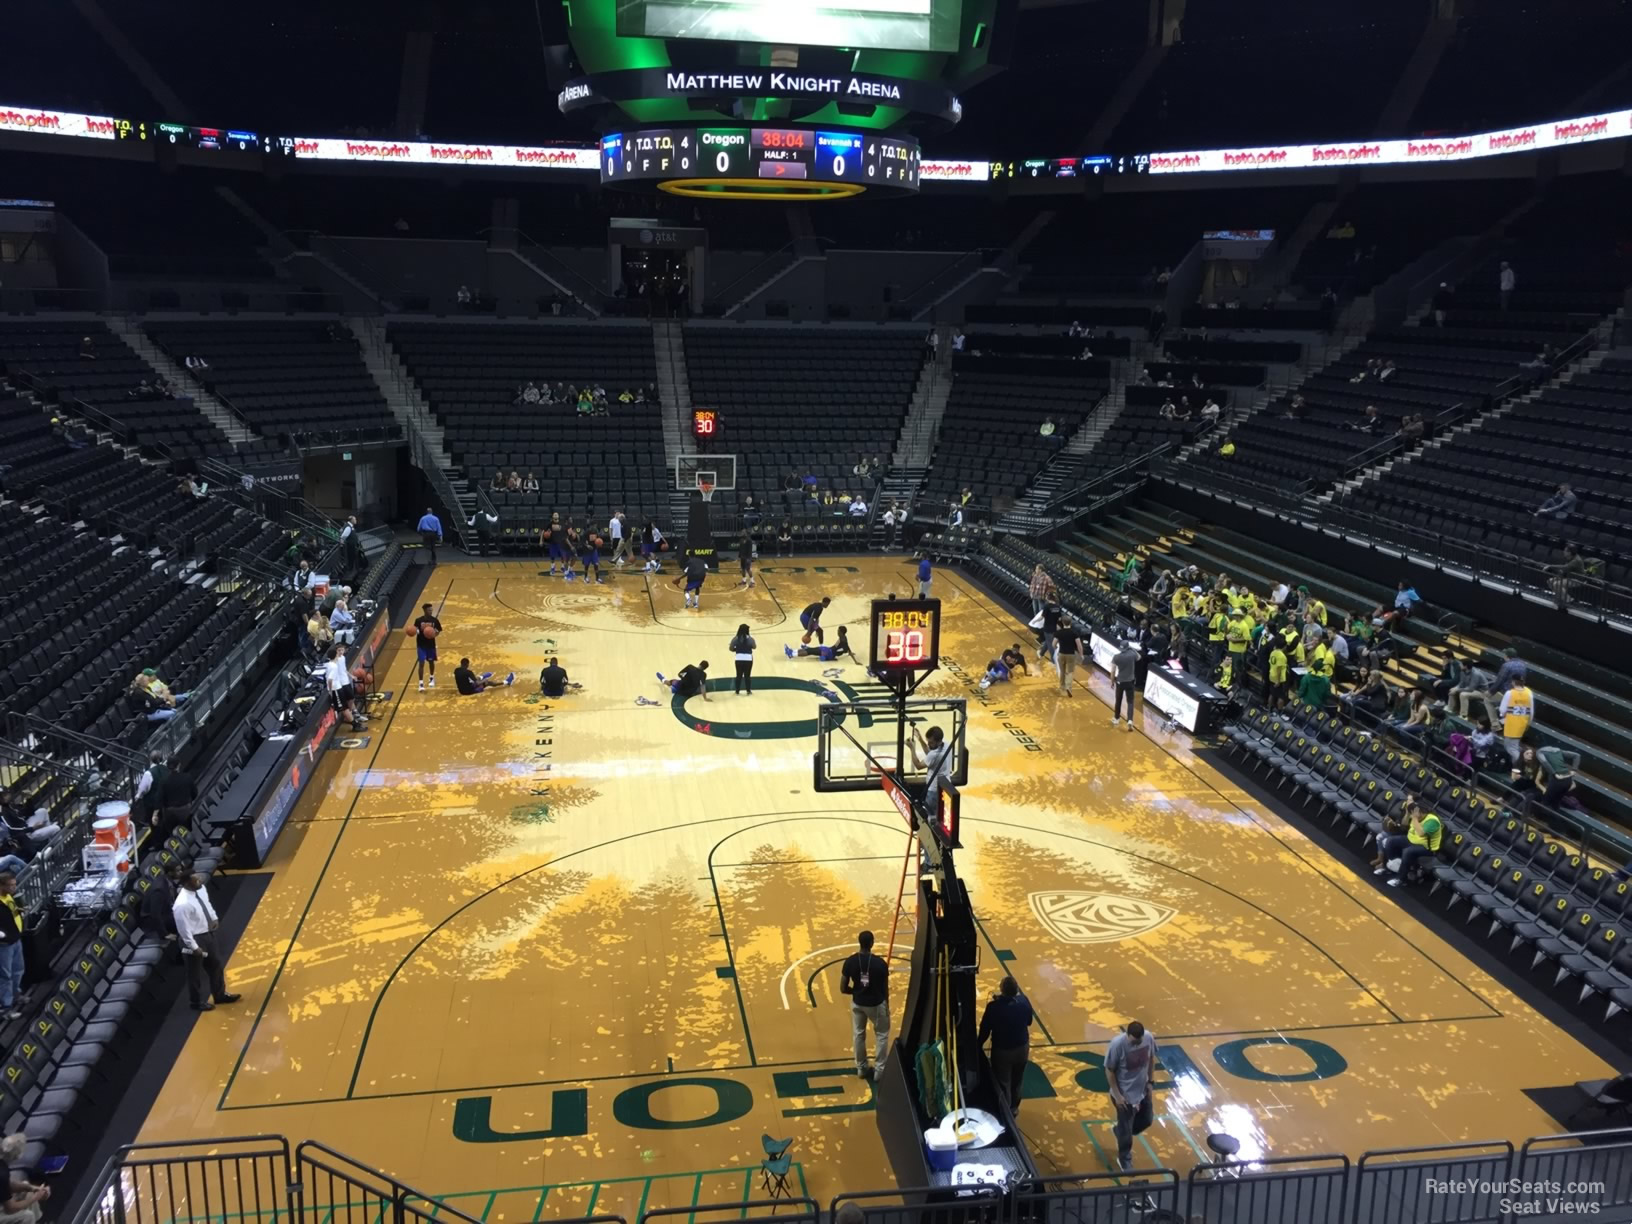 section 118, row ff seat view  - matthew knight arena